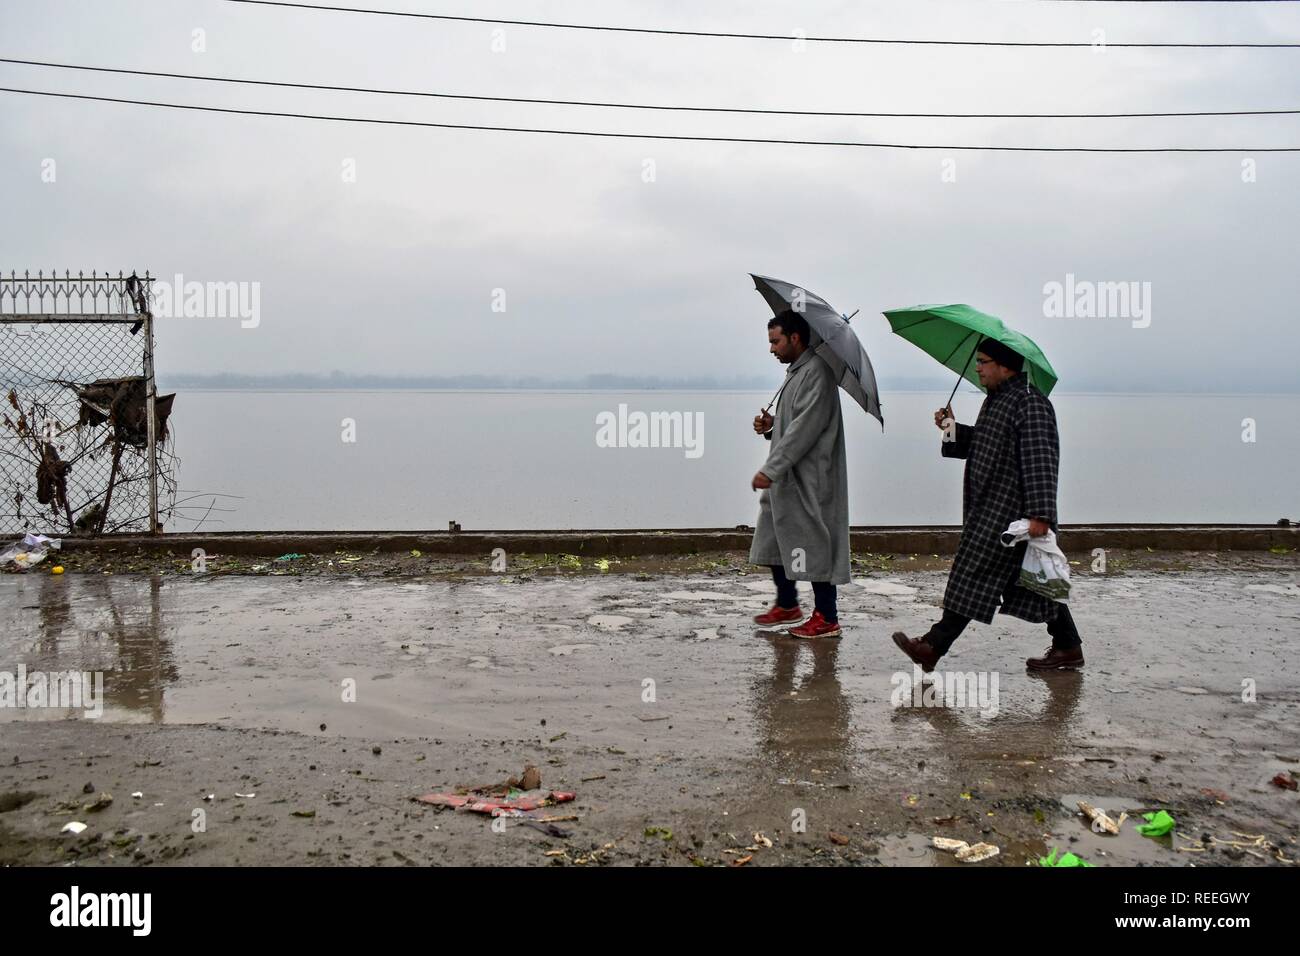 Kashmiri residents hold umbrellas as they walk during rainfall in Srinagar, Indian administered Kashmir. The upper reaches on Monday received fresh snowfall, while rains lashed Srinagar, and other parts of the Kashmir valley. The weather man has forecast moderate to heavy rain and snowfall over the state during the next 24 hours. Stock Photo